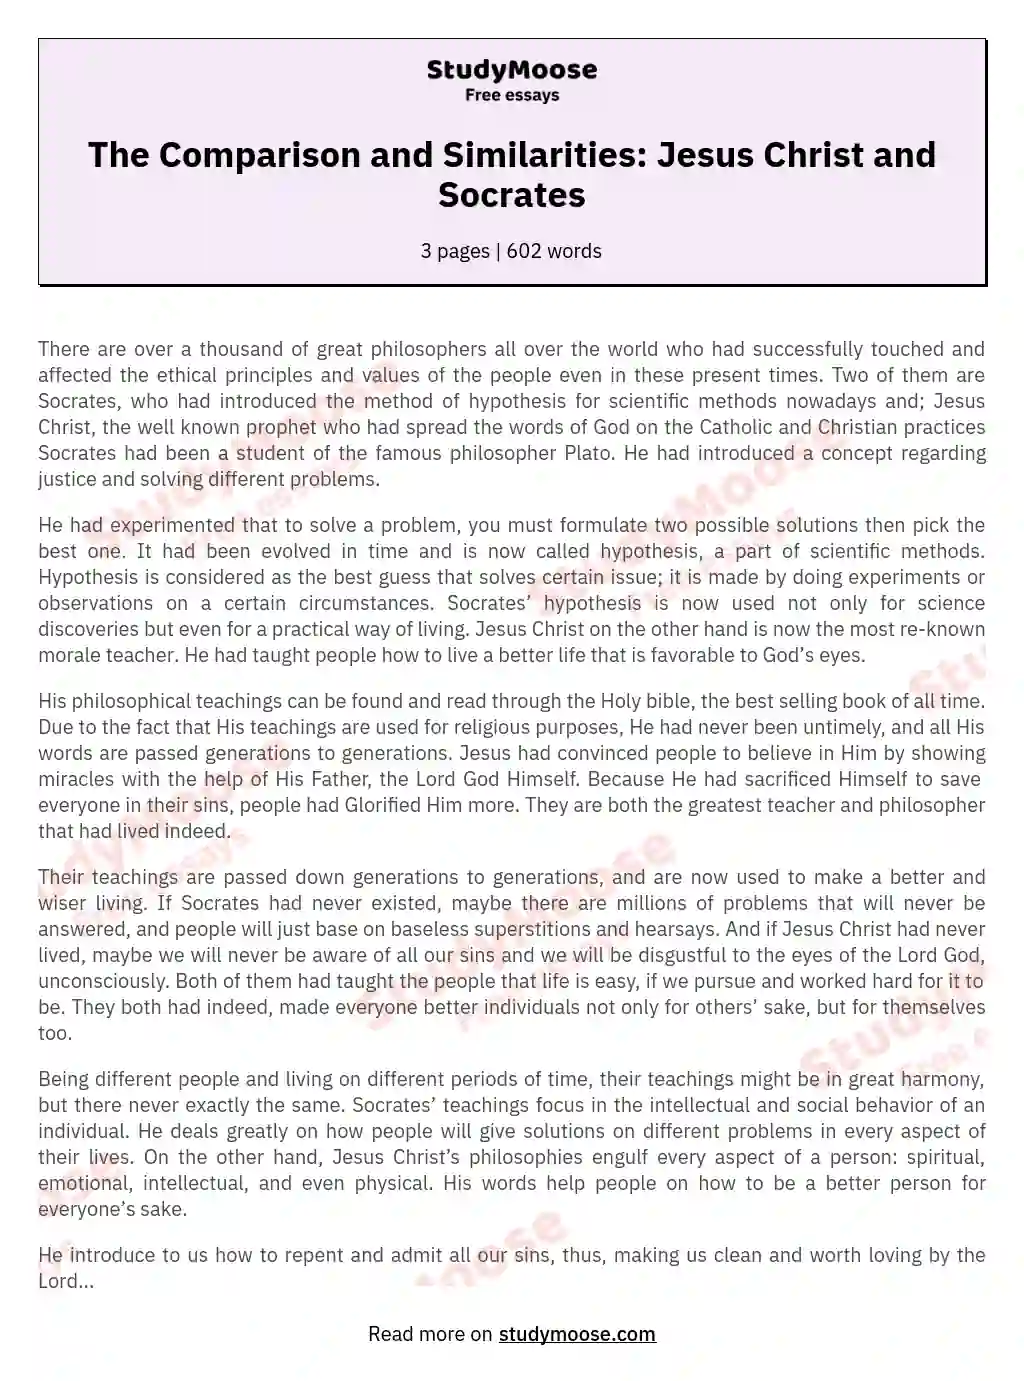 The Comparison and Similarities: Jesus Christ and Socrates essay